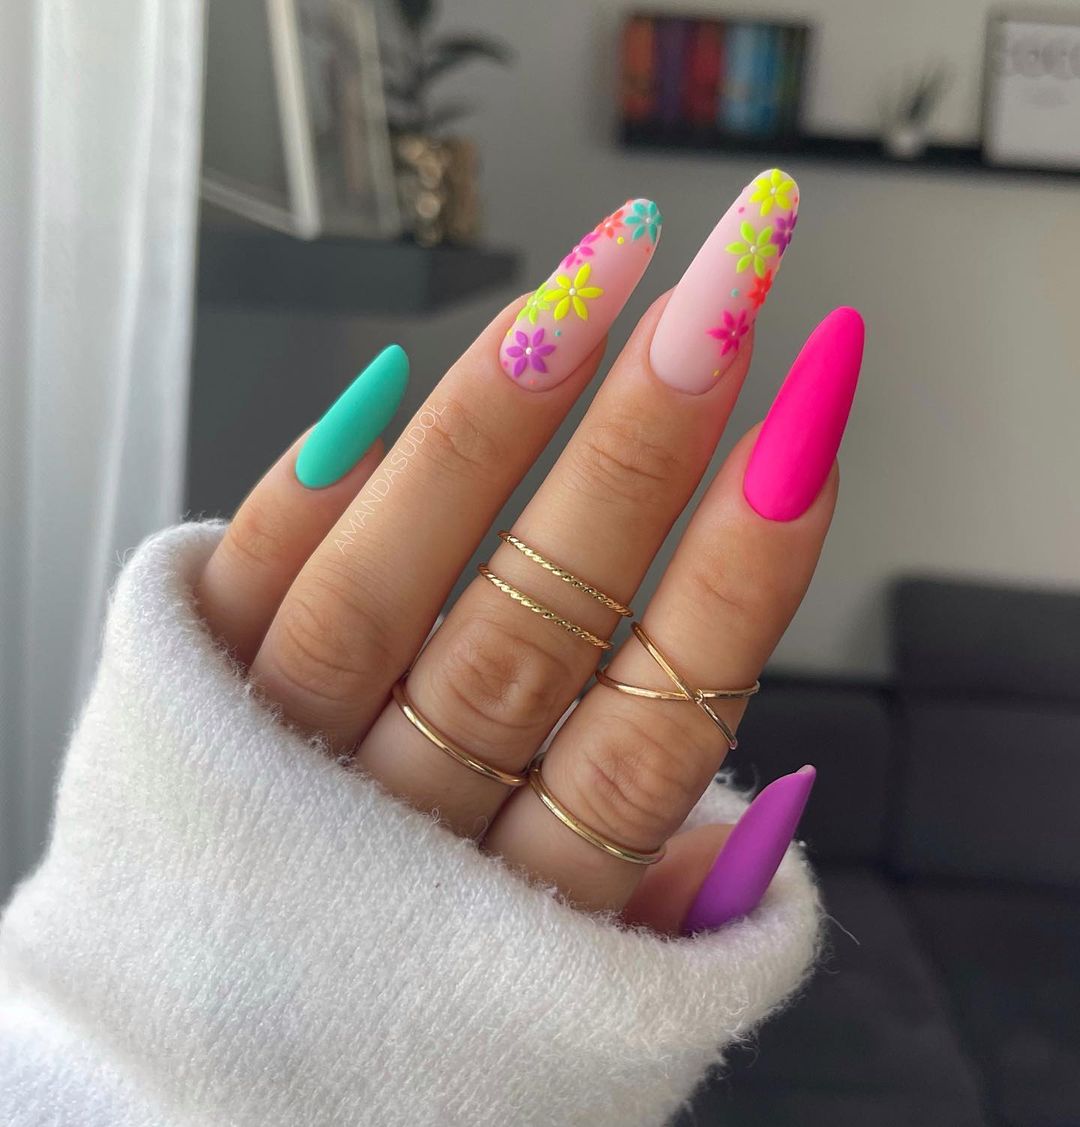 Neon Matte Nails with Summer Floral Design